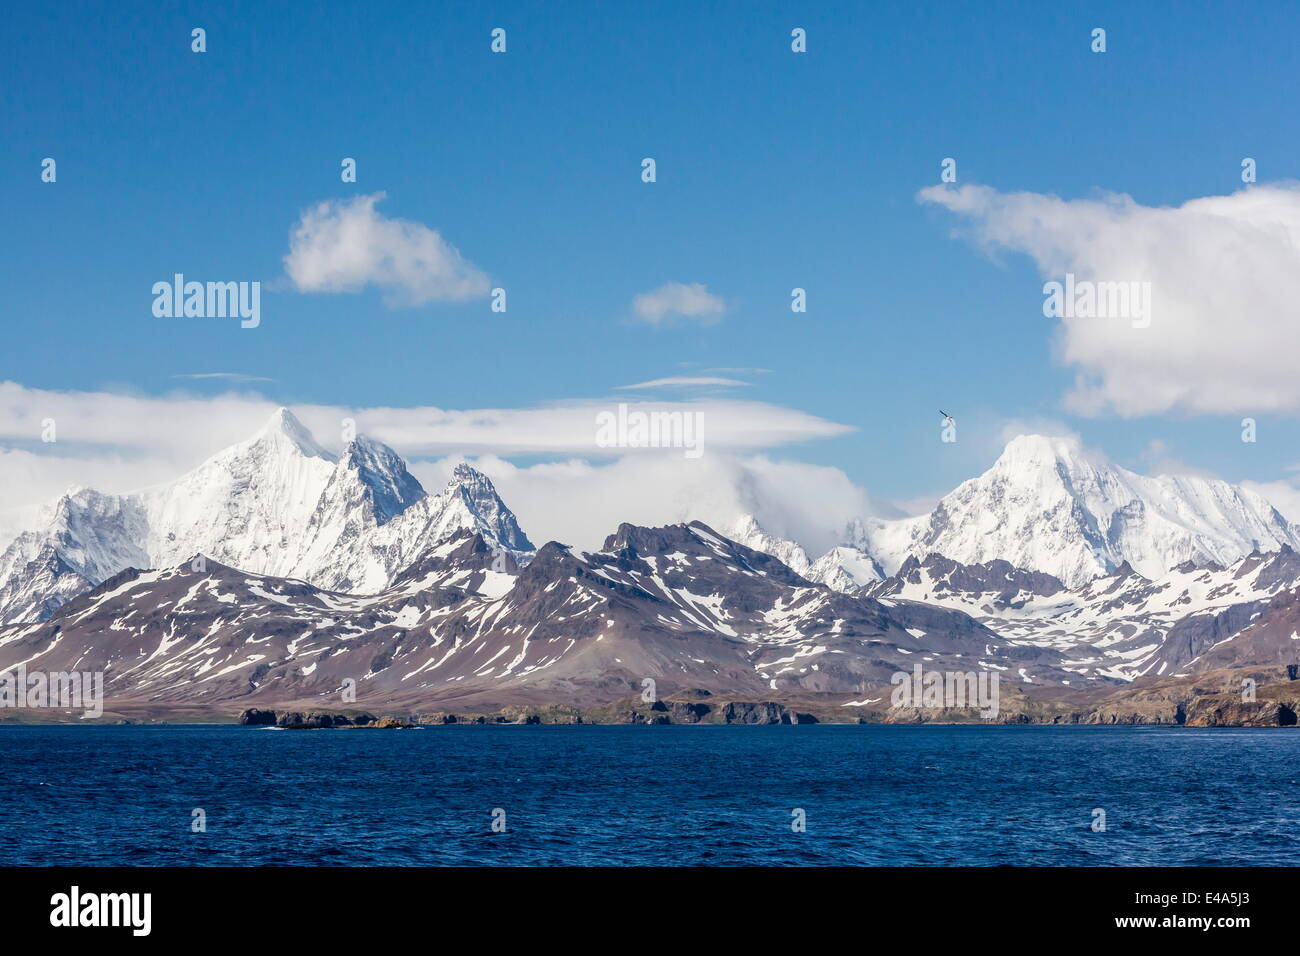 View of snow-capped mountains on approach to Stromness Harbor, South Georgia, UK Overseas Protectorate, Polar Regions Stock Photo